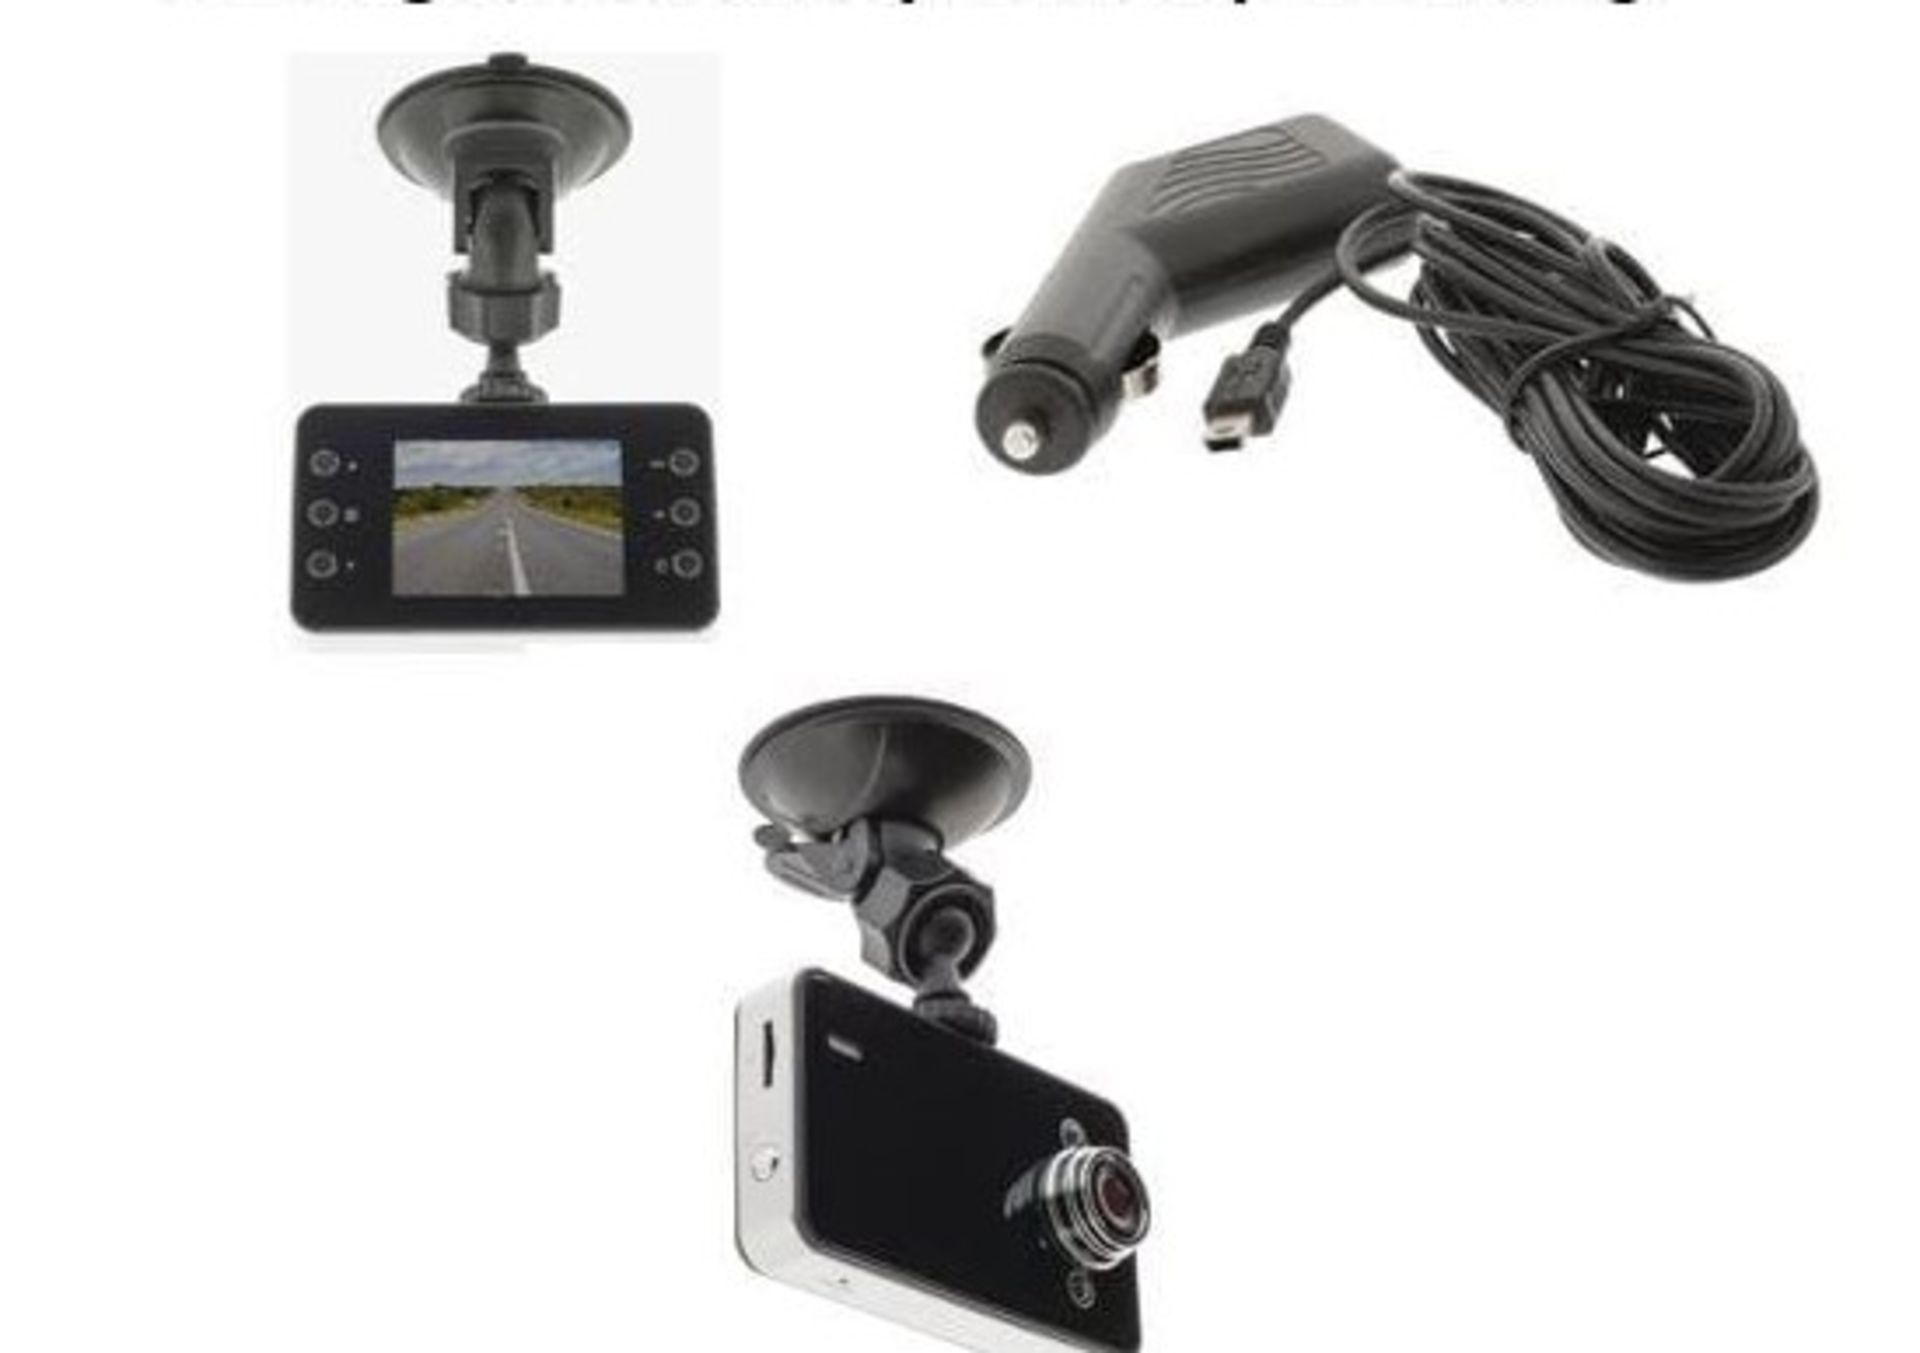 20 x Brand new HD Dashcam with 2.4" screen integrated, rechargeable battery and loop recording